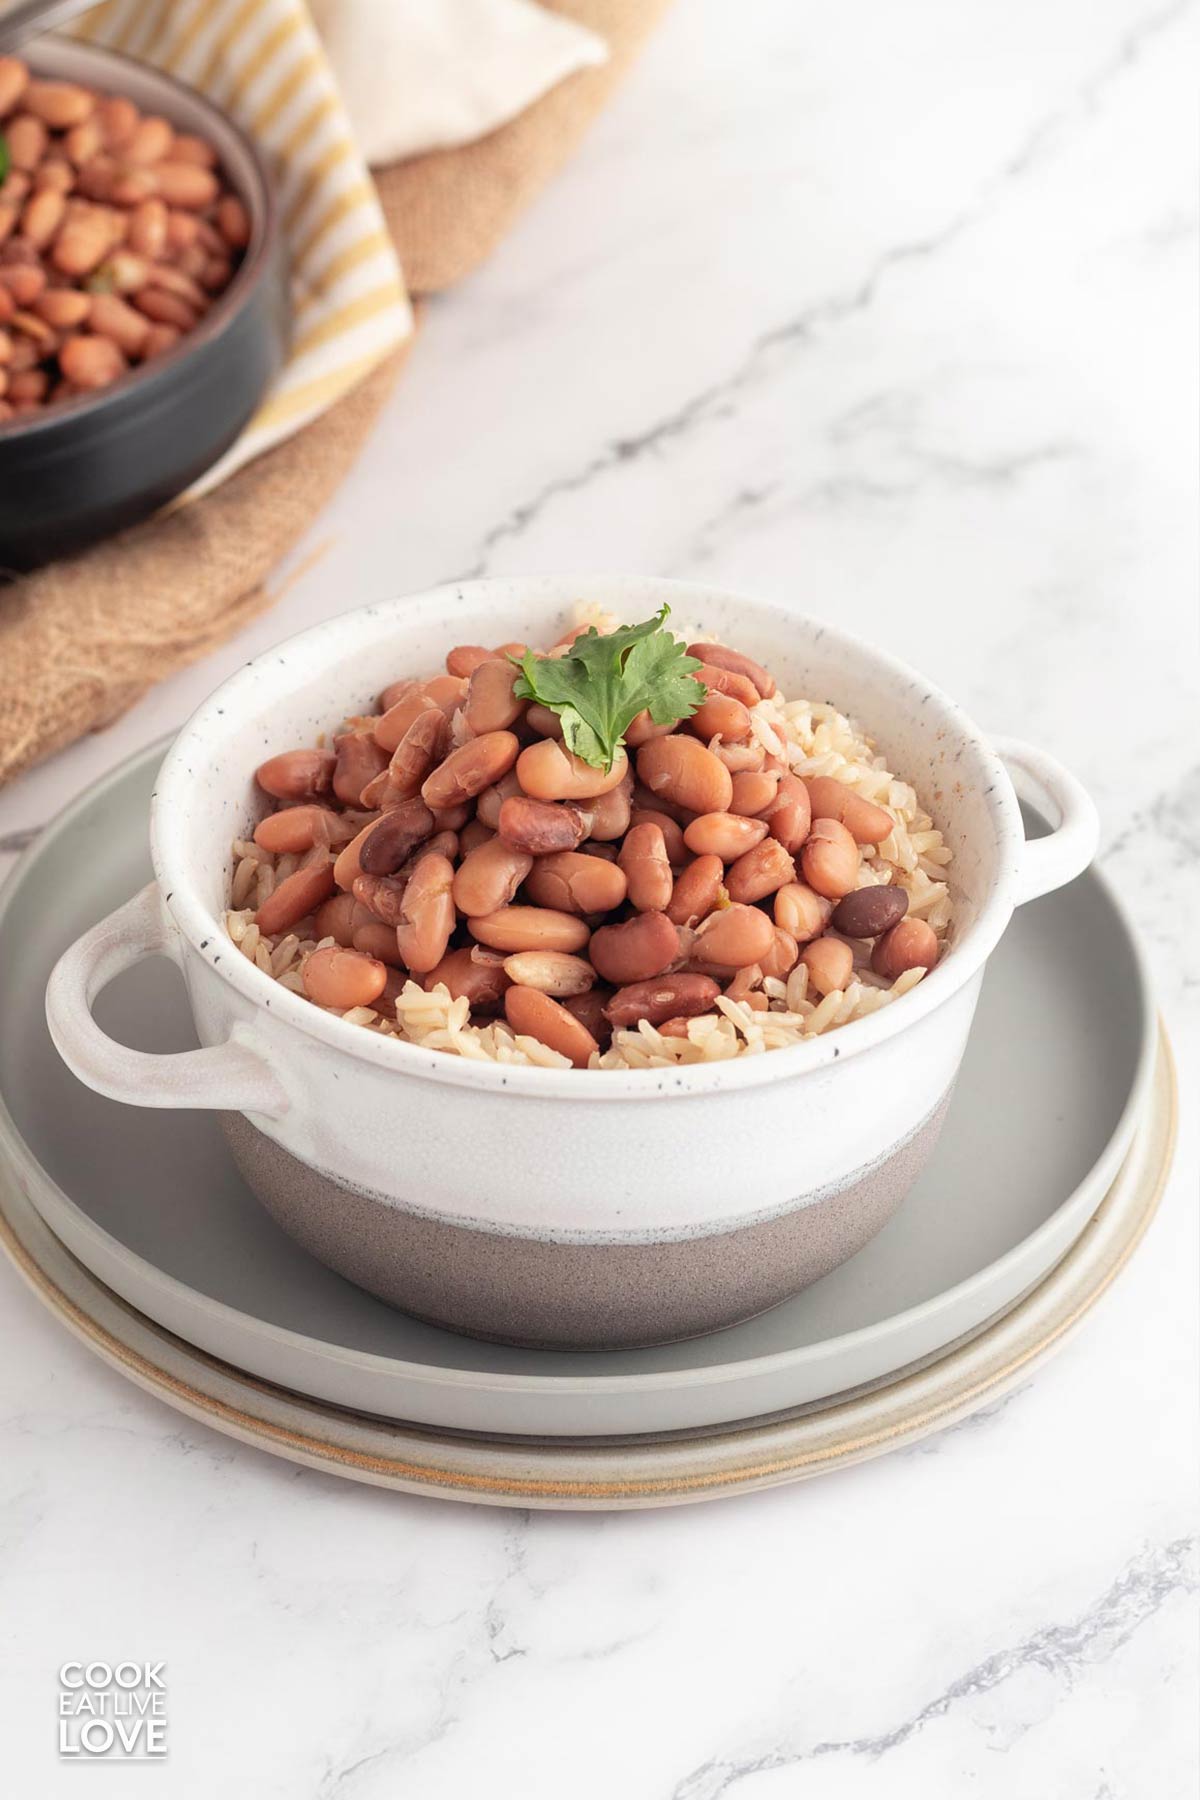 Slow cooker pinto beans in a bowl on a plate.